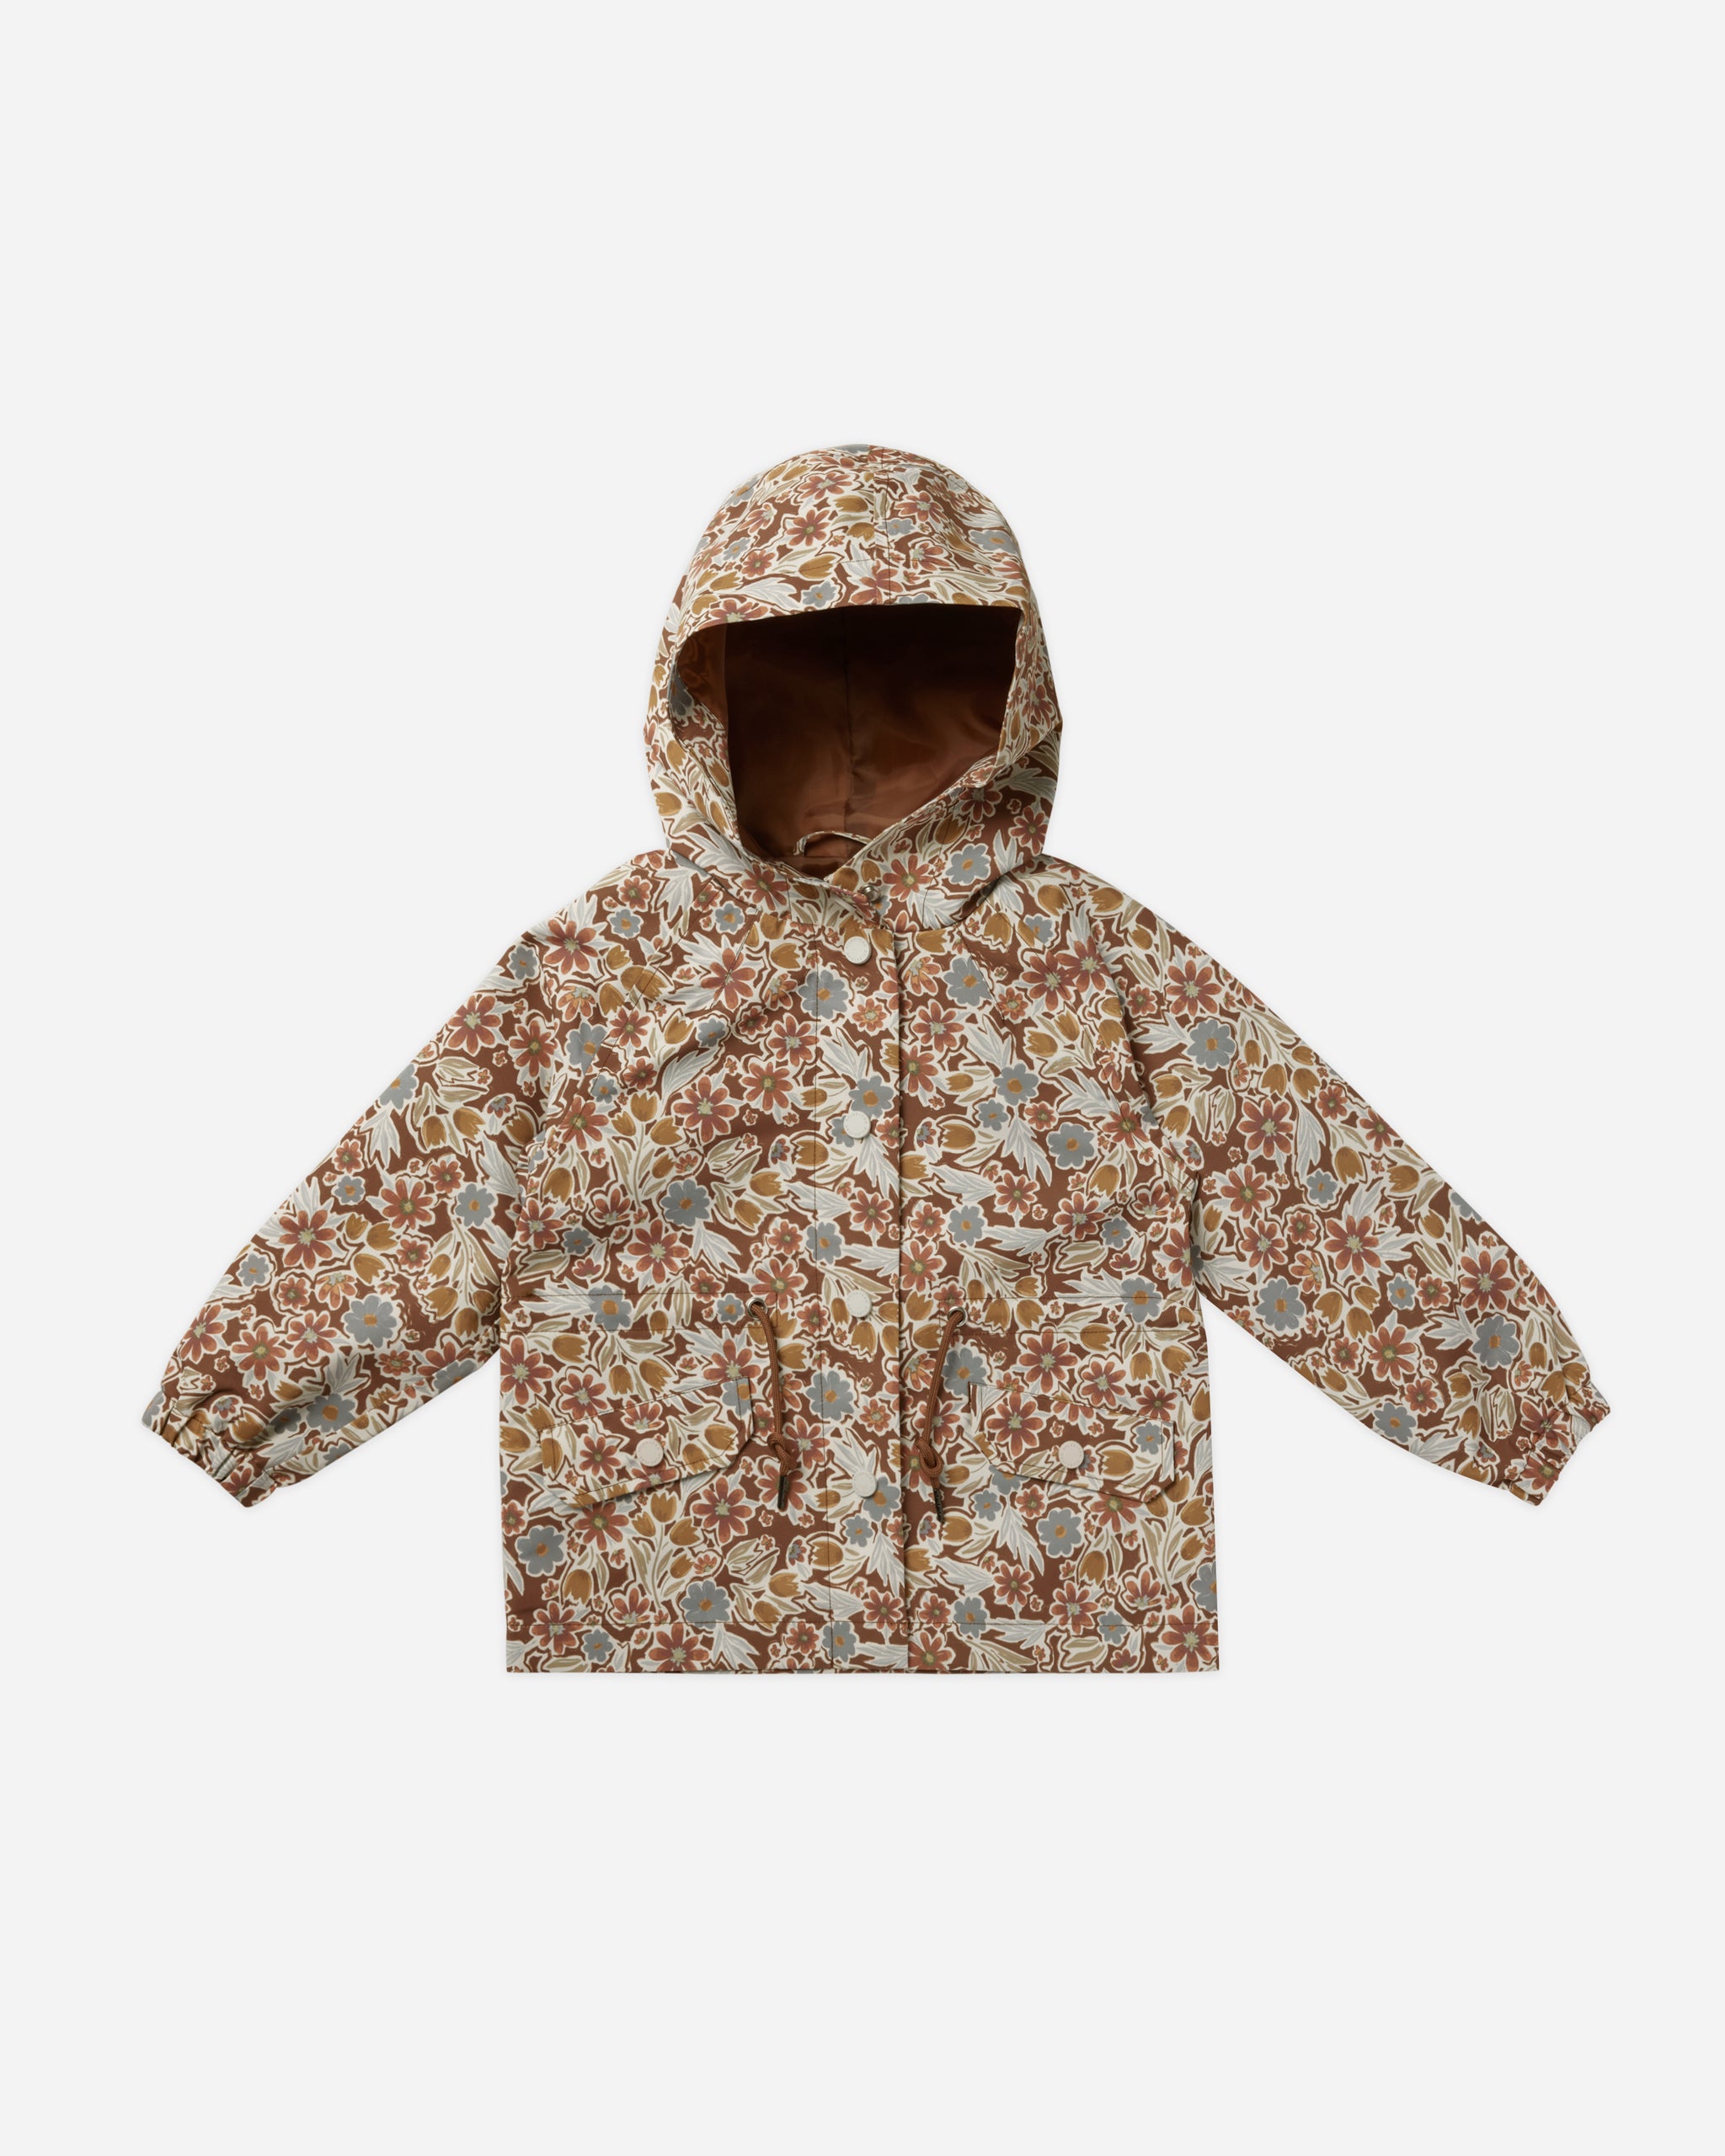 Raincoat || Autumn Bloom - Rylee + Cru | Kids Clothes | Trendy Baby Clothes | Modern Infant Outfits |